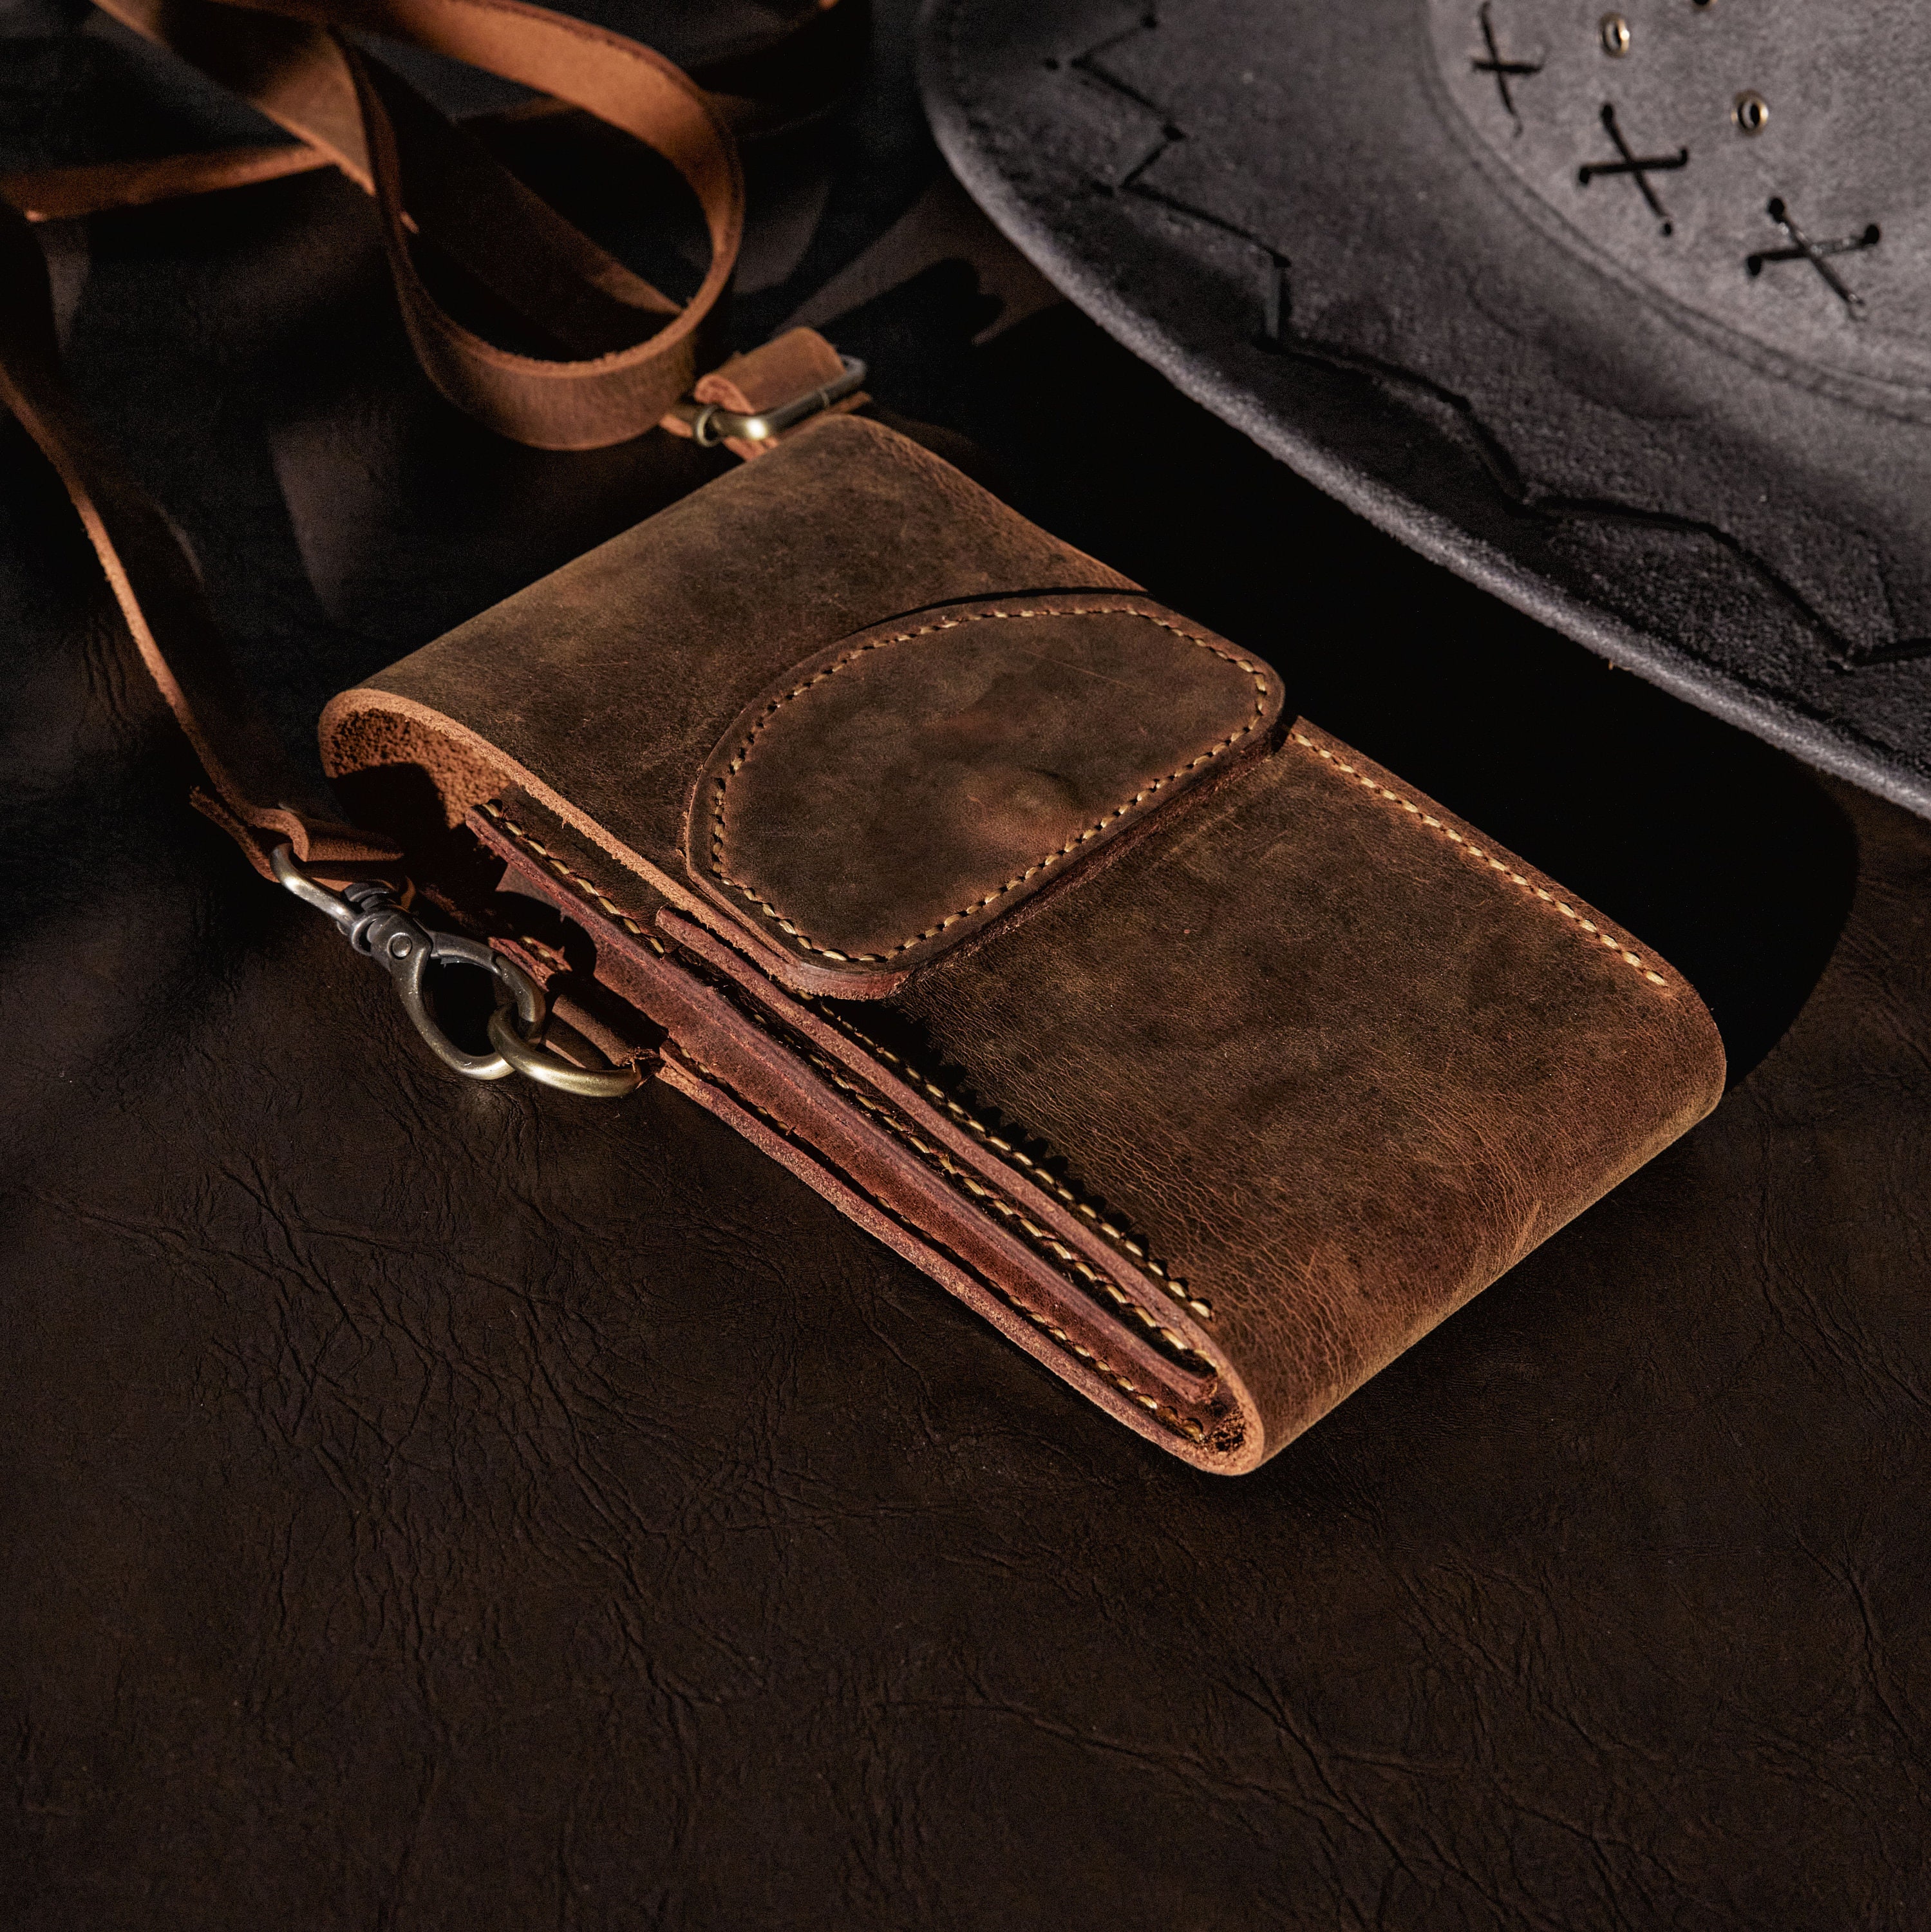 Men Purse Crossbody Bag Leather Holster Case with Belt Clip Cell Phone  Pouch for iPhone Xs Max Holst…See more Men Purse Crossbody Bag Leather  Holster